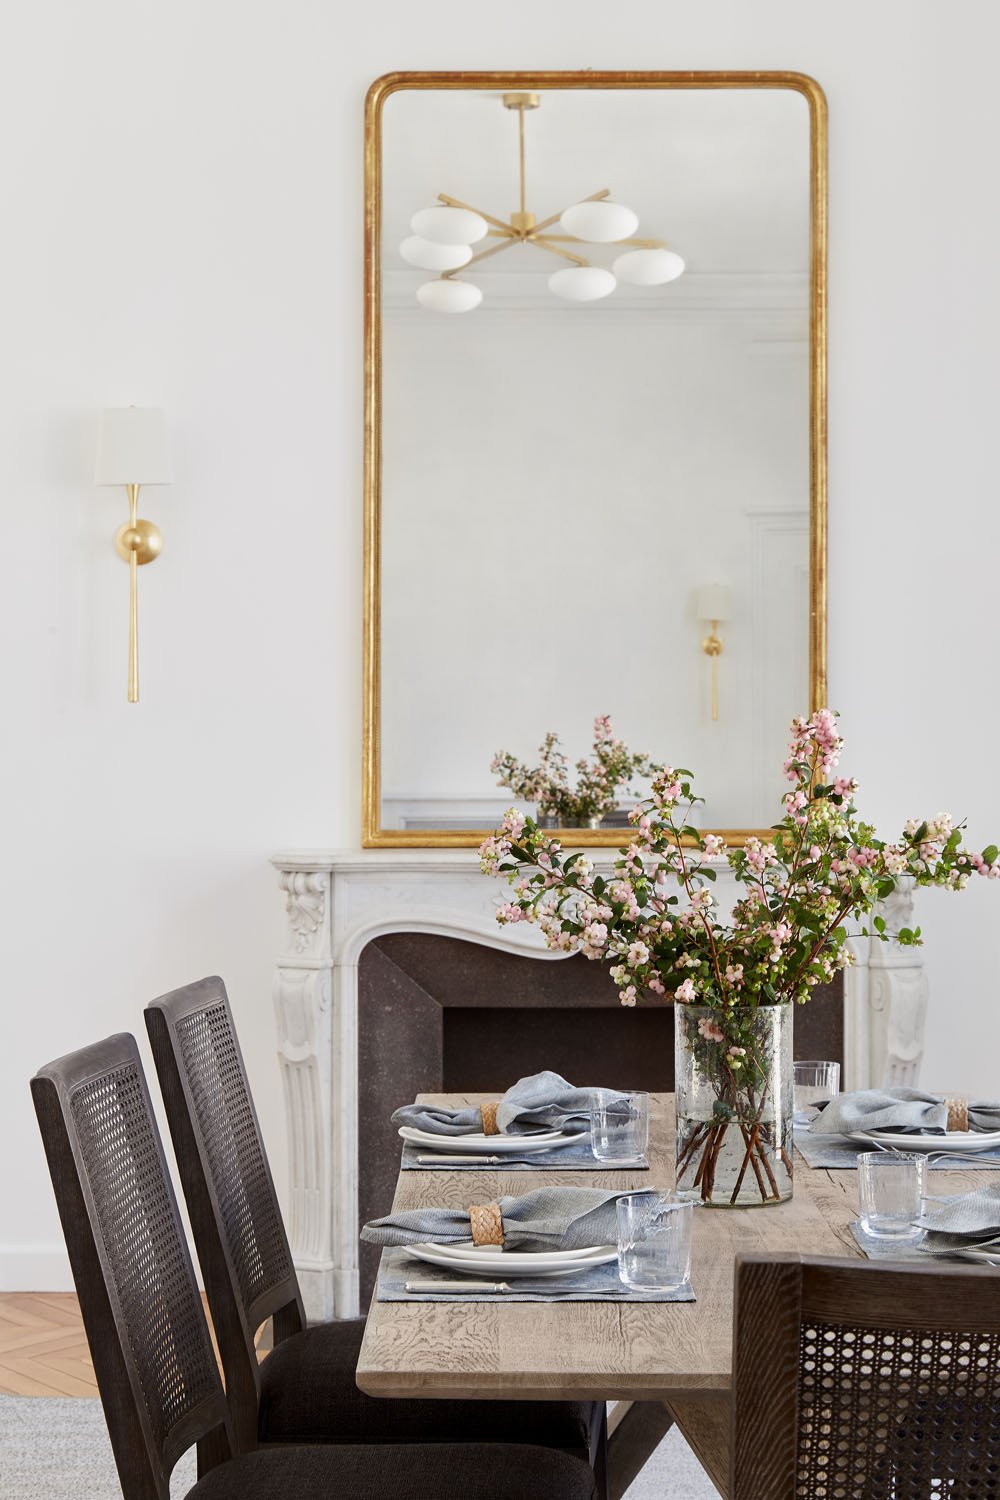  Parisian dining room with plates set up on the wooden table together with a beautiful flower arrangement. The white wall is decorated with a big mirror with golden frame. 